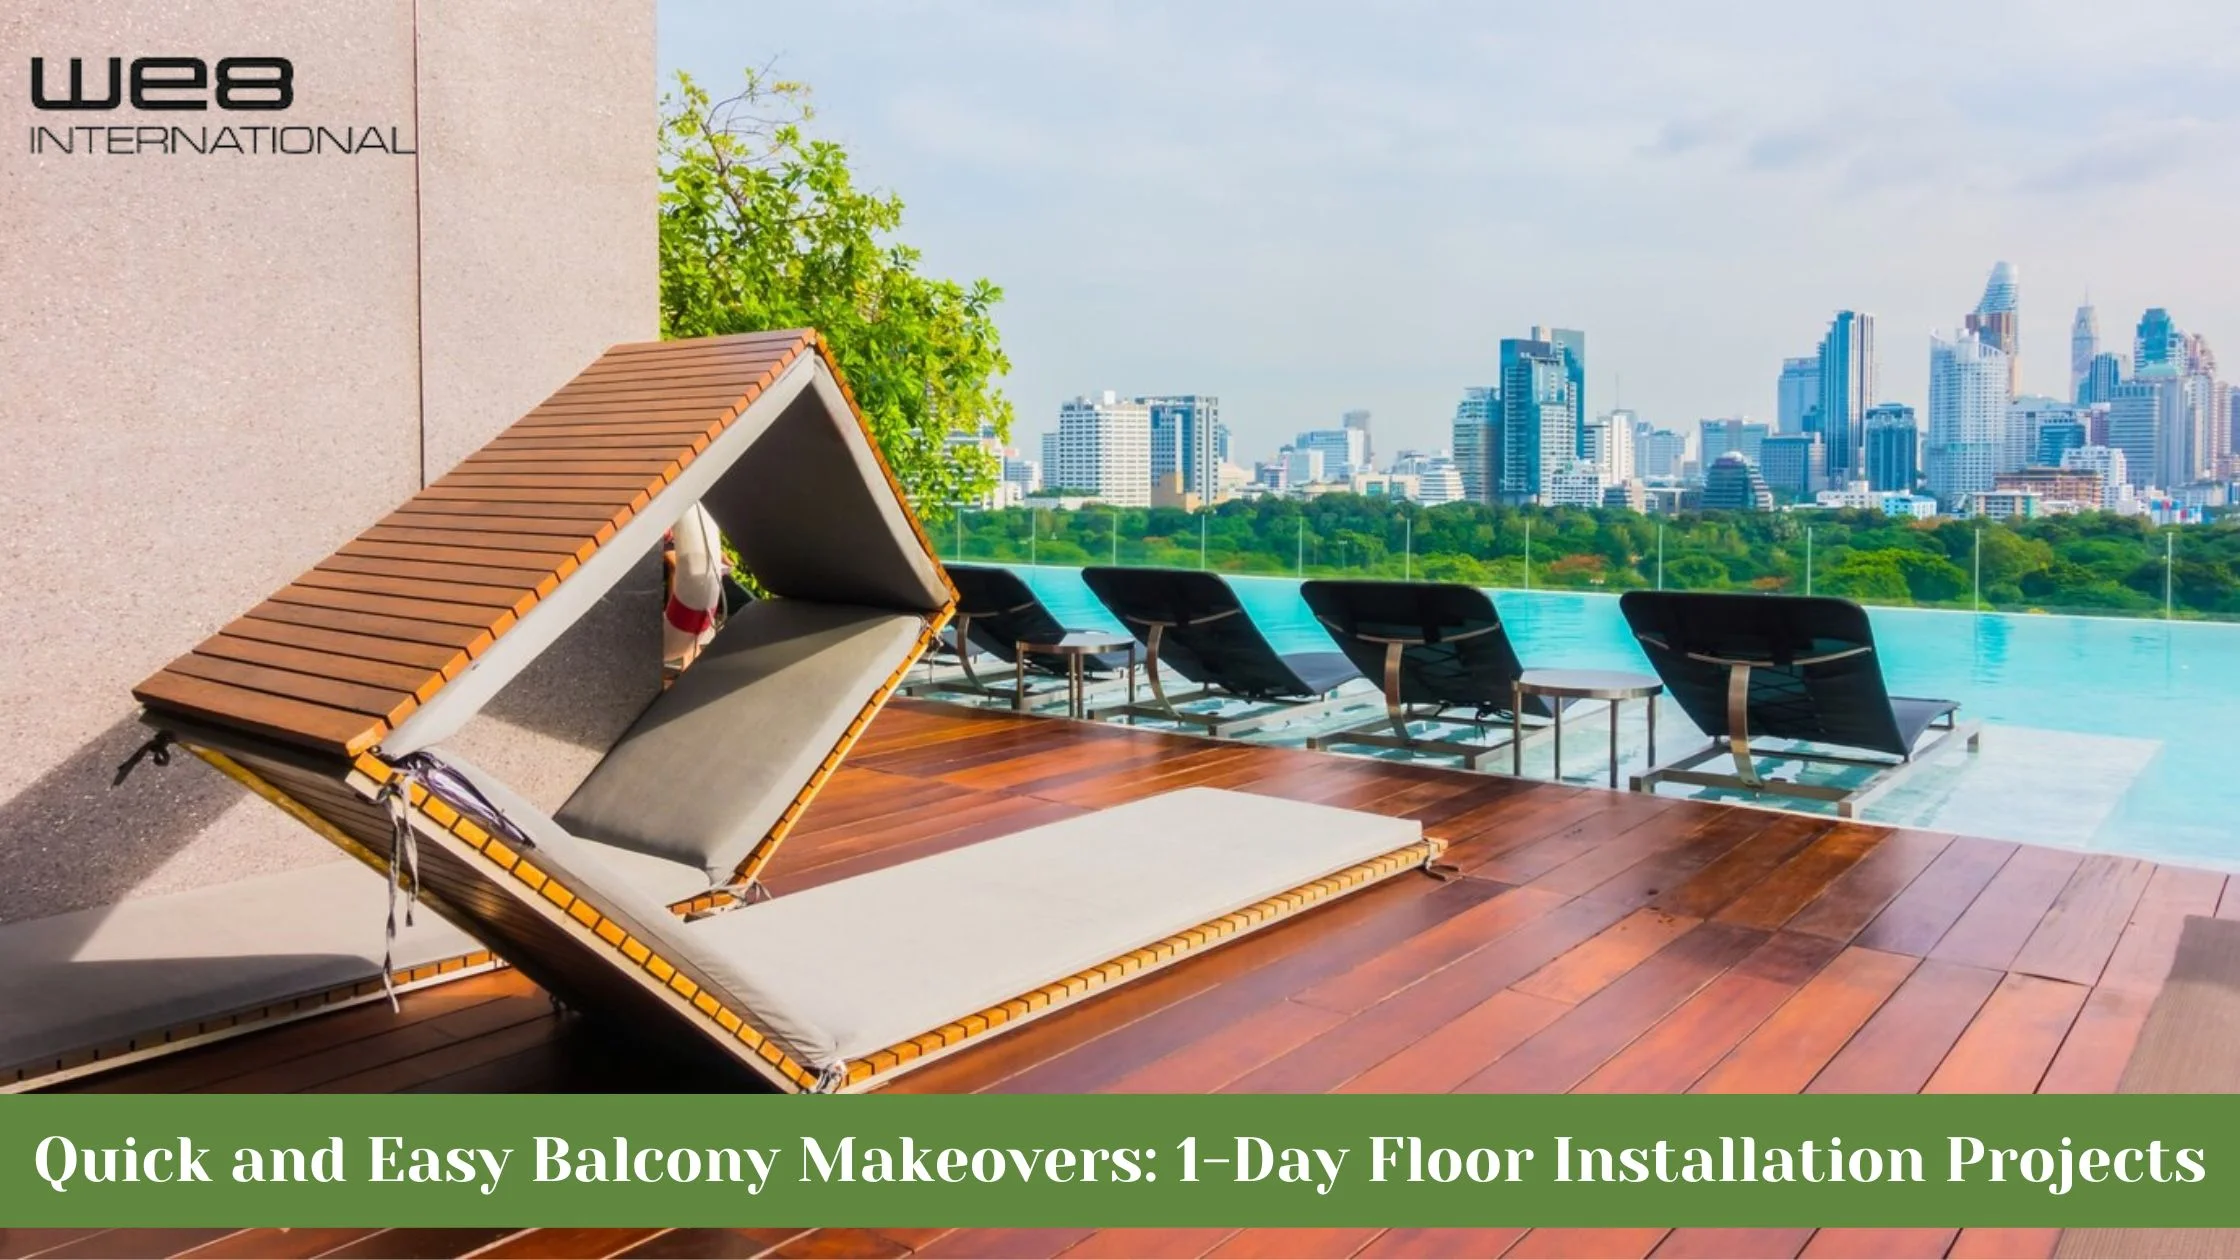 Quick and Easy Balcony Makeovers: 1-Day Floor Installation Projects